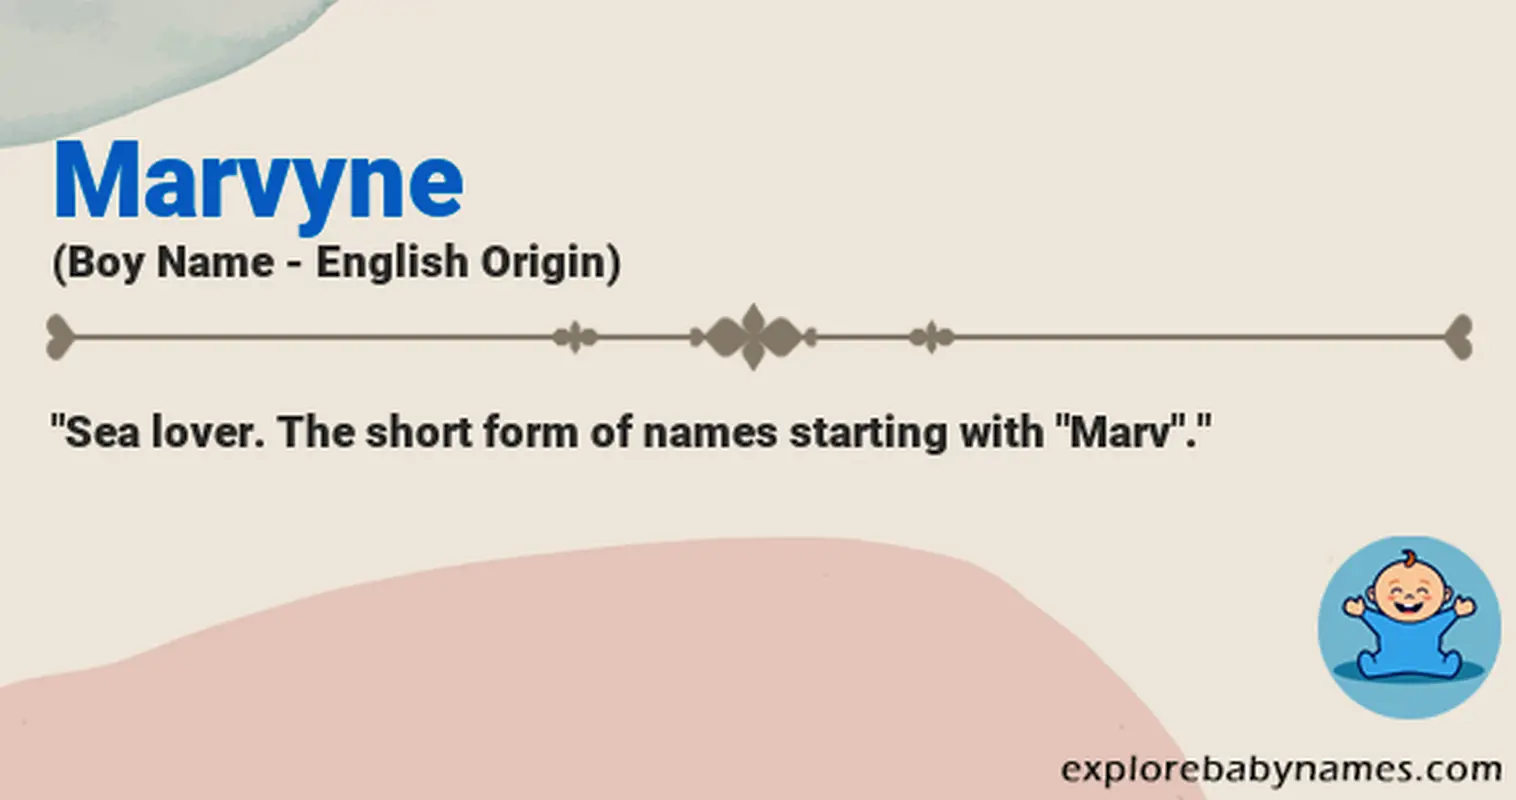 Meaning of Marvyne